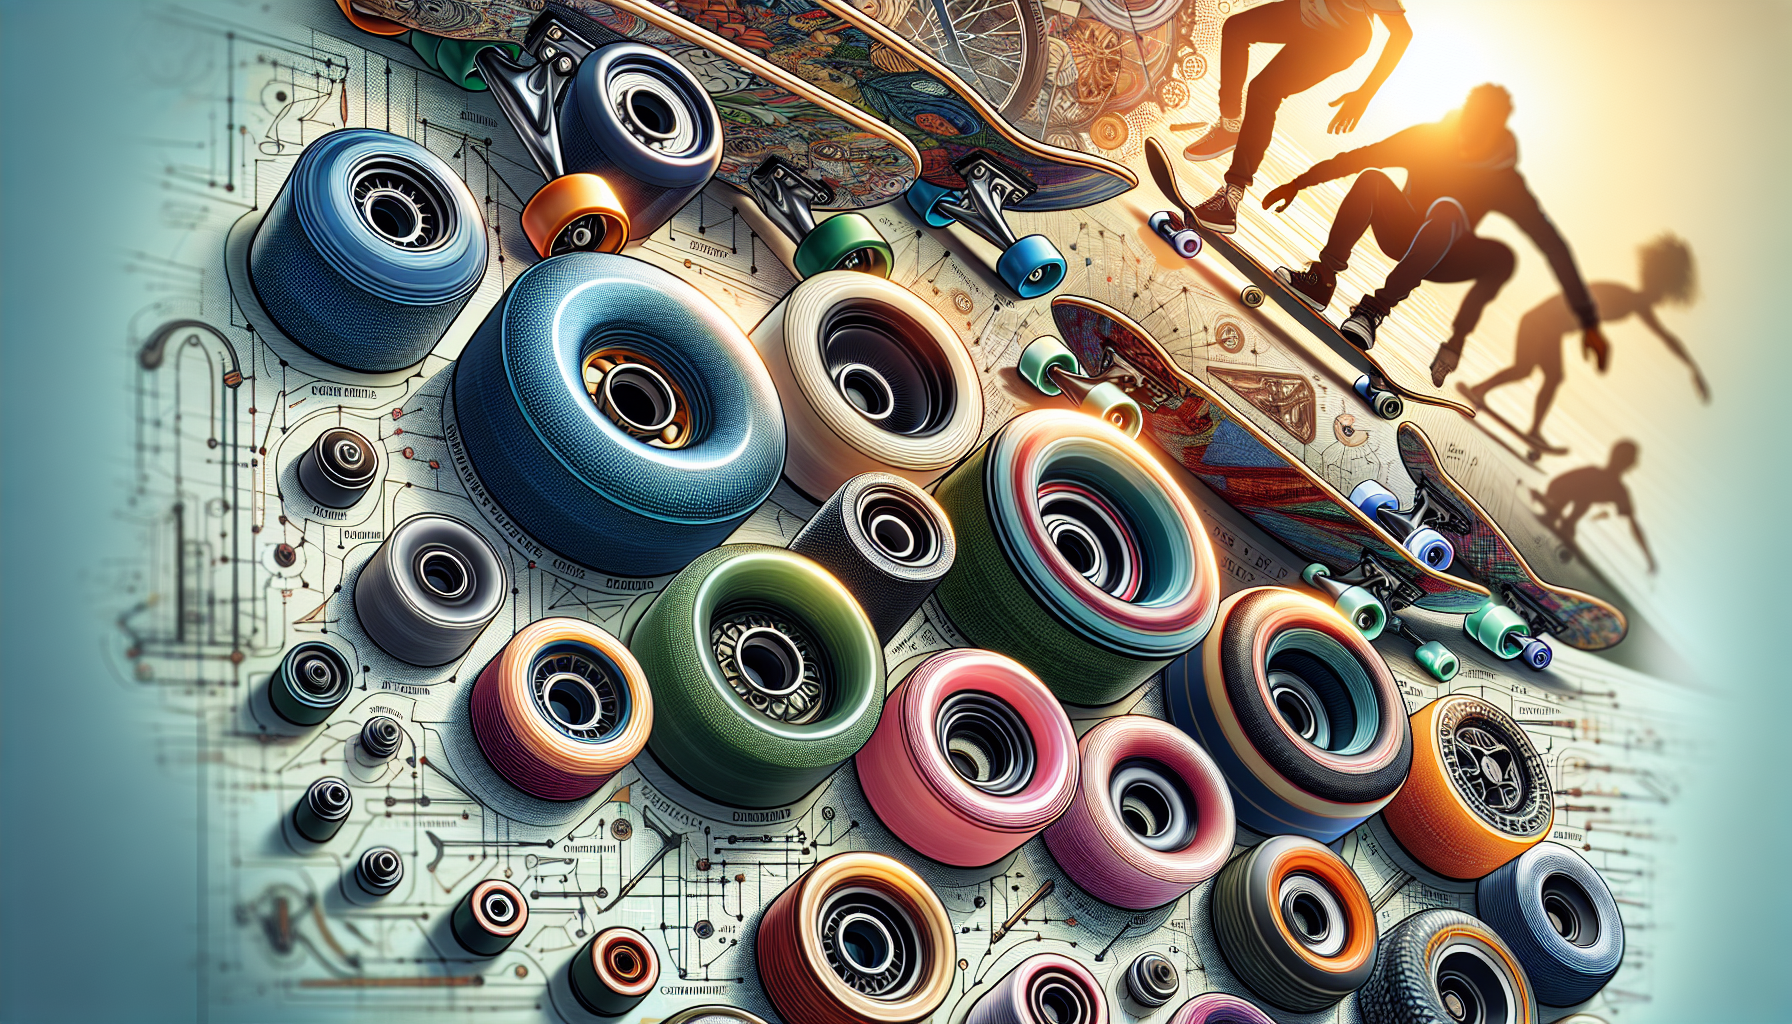 How Do You Find The Best Skateboard Wheels For Cruising And Carving?